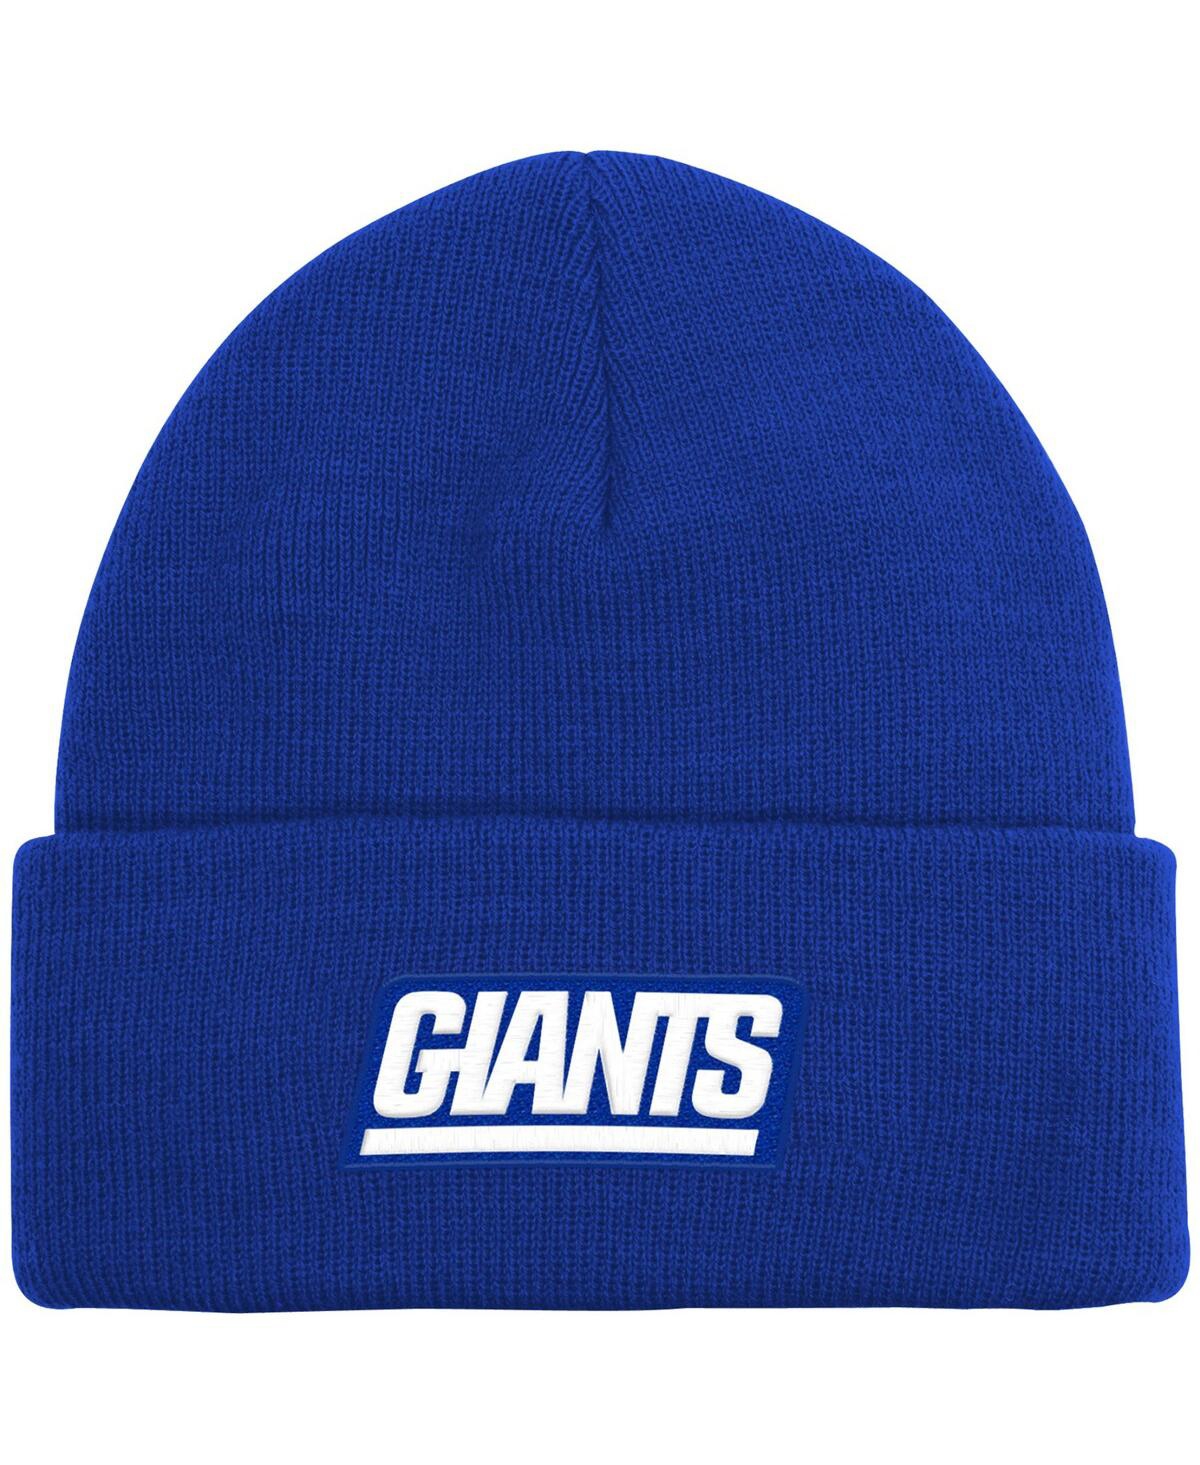 Shop Outerstuff Big Boys And Girls Royal New York Giants Basic Cuffed Knit Hat